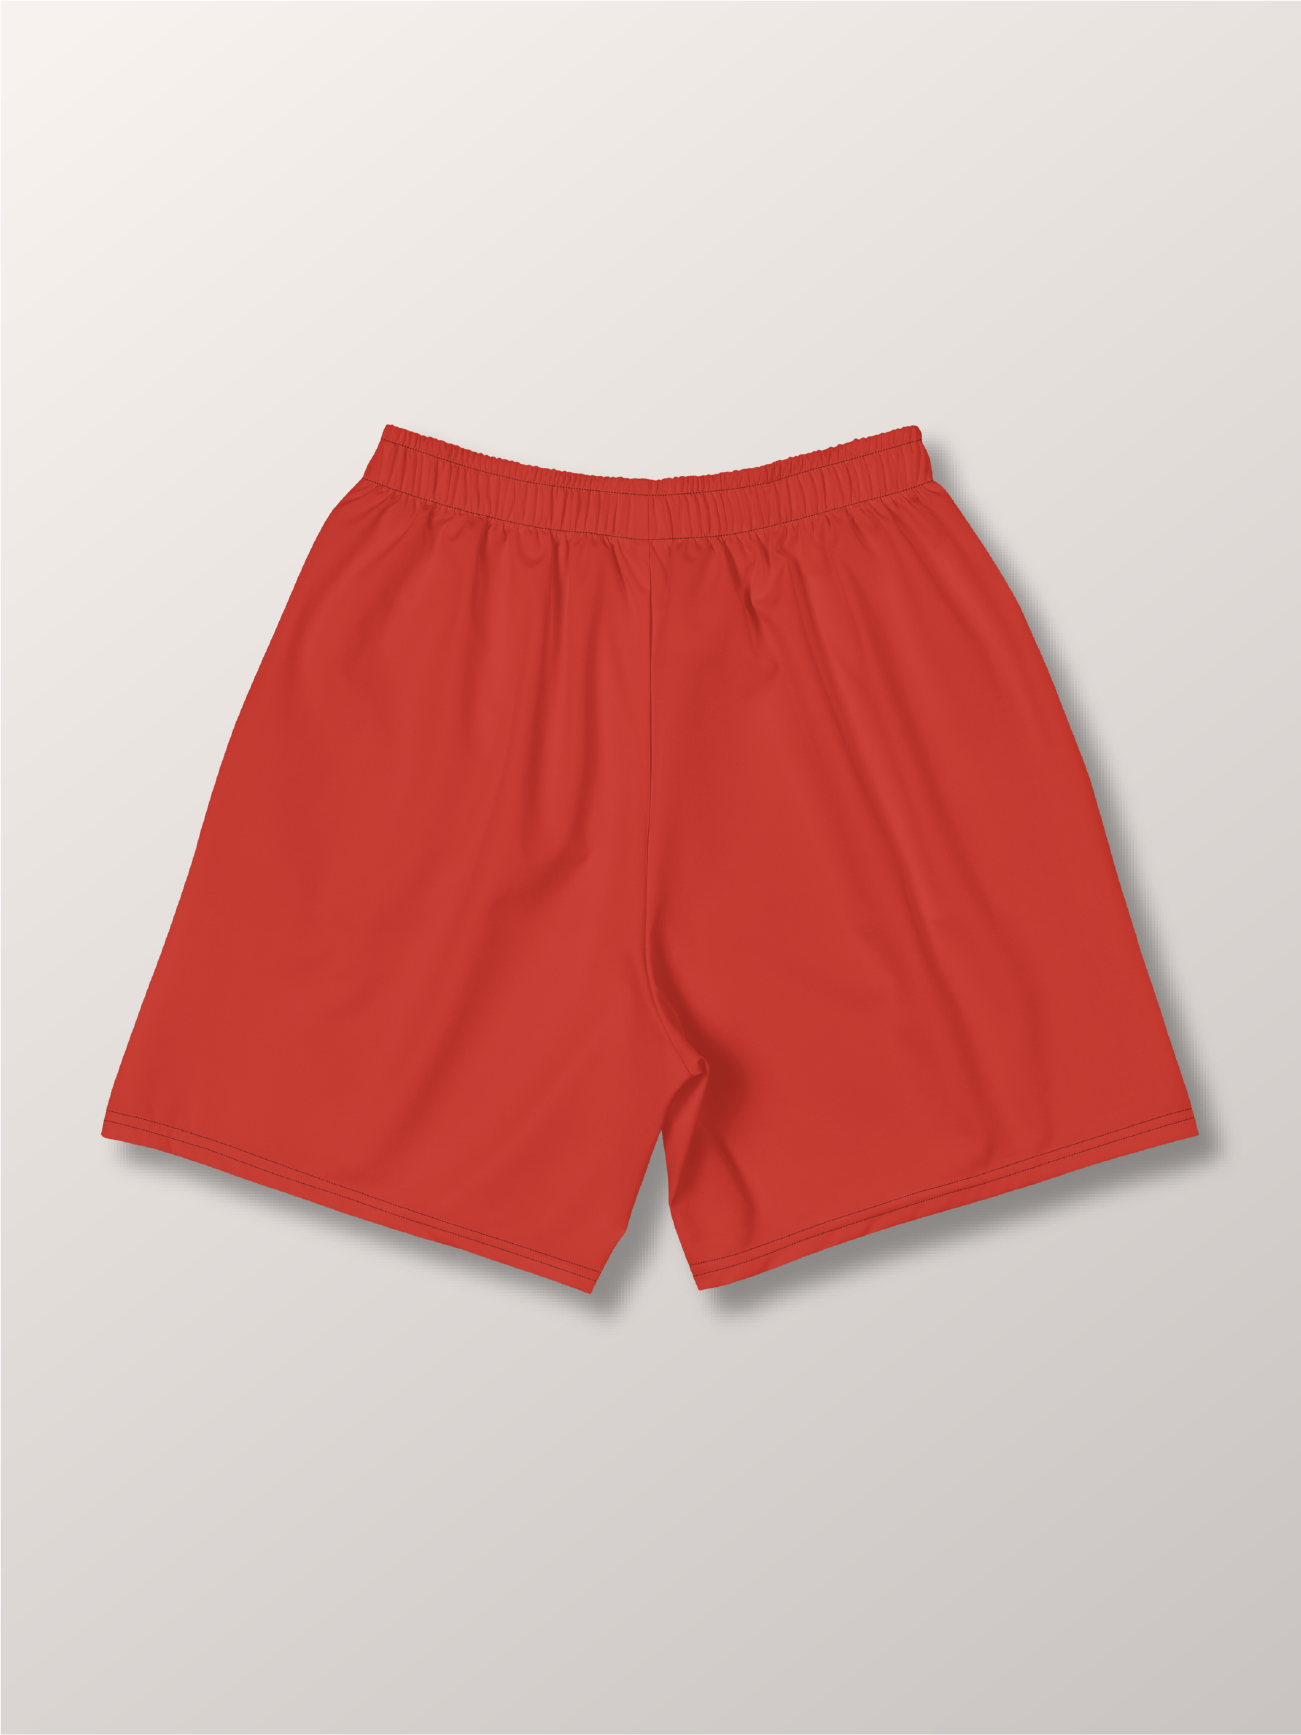 Classic Spandex Essentials Red Lacrosse Short  - Red Front 